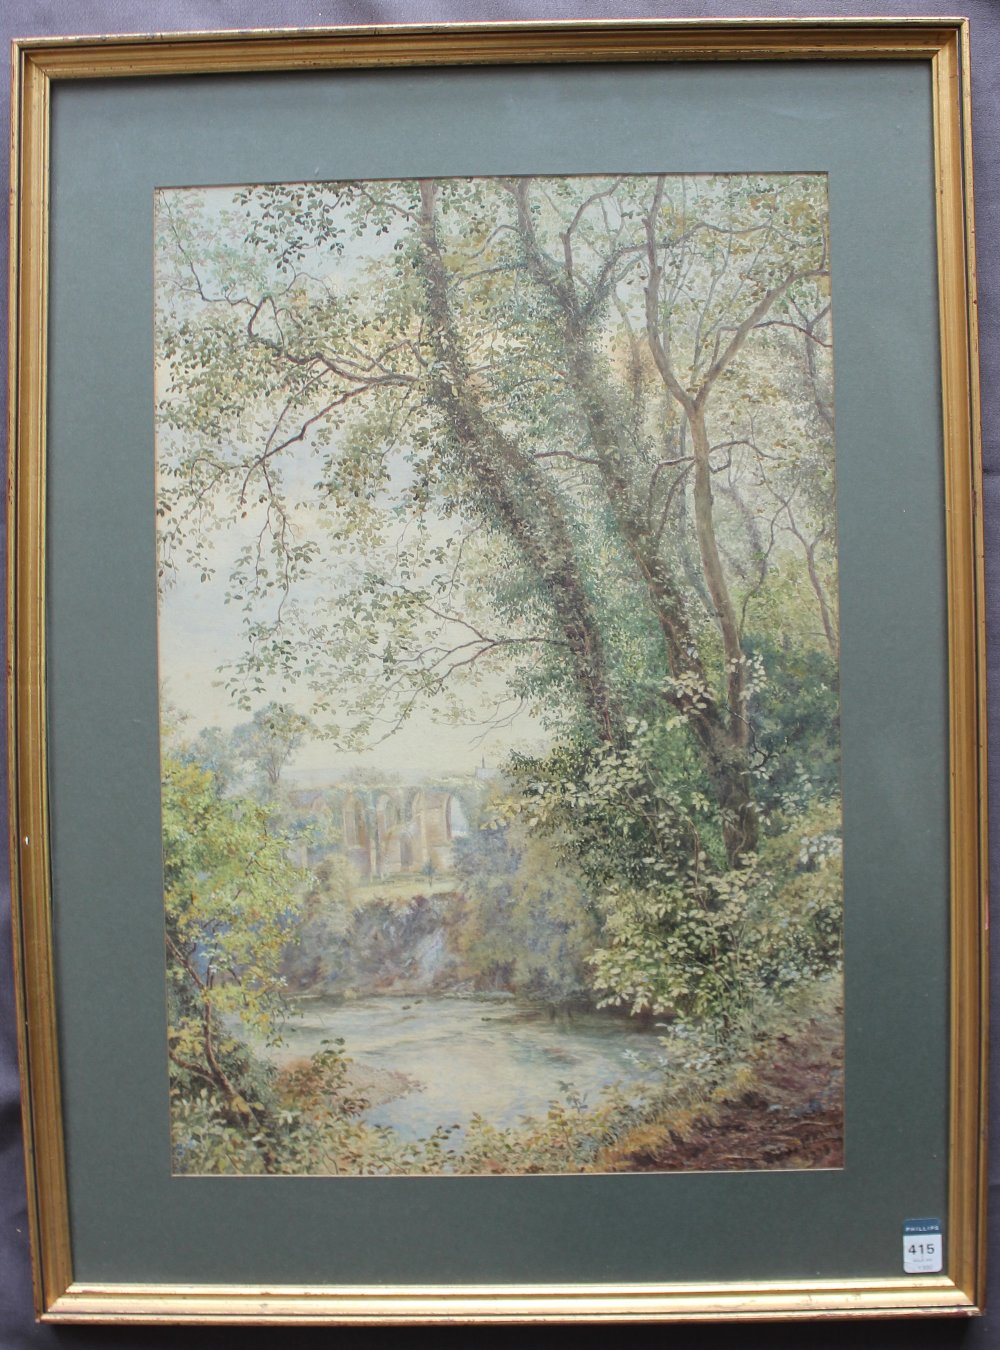 A E De Maine A river scene with ruins in the background Watercolour Signed 58 x 39cm - Image 2 of 4